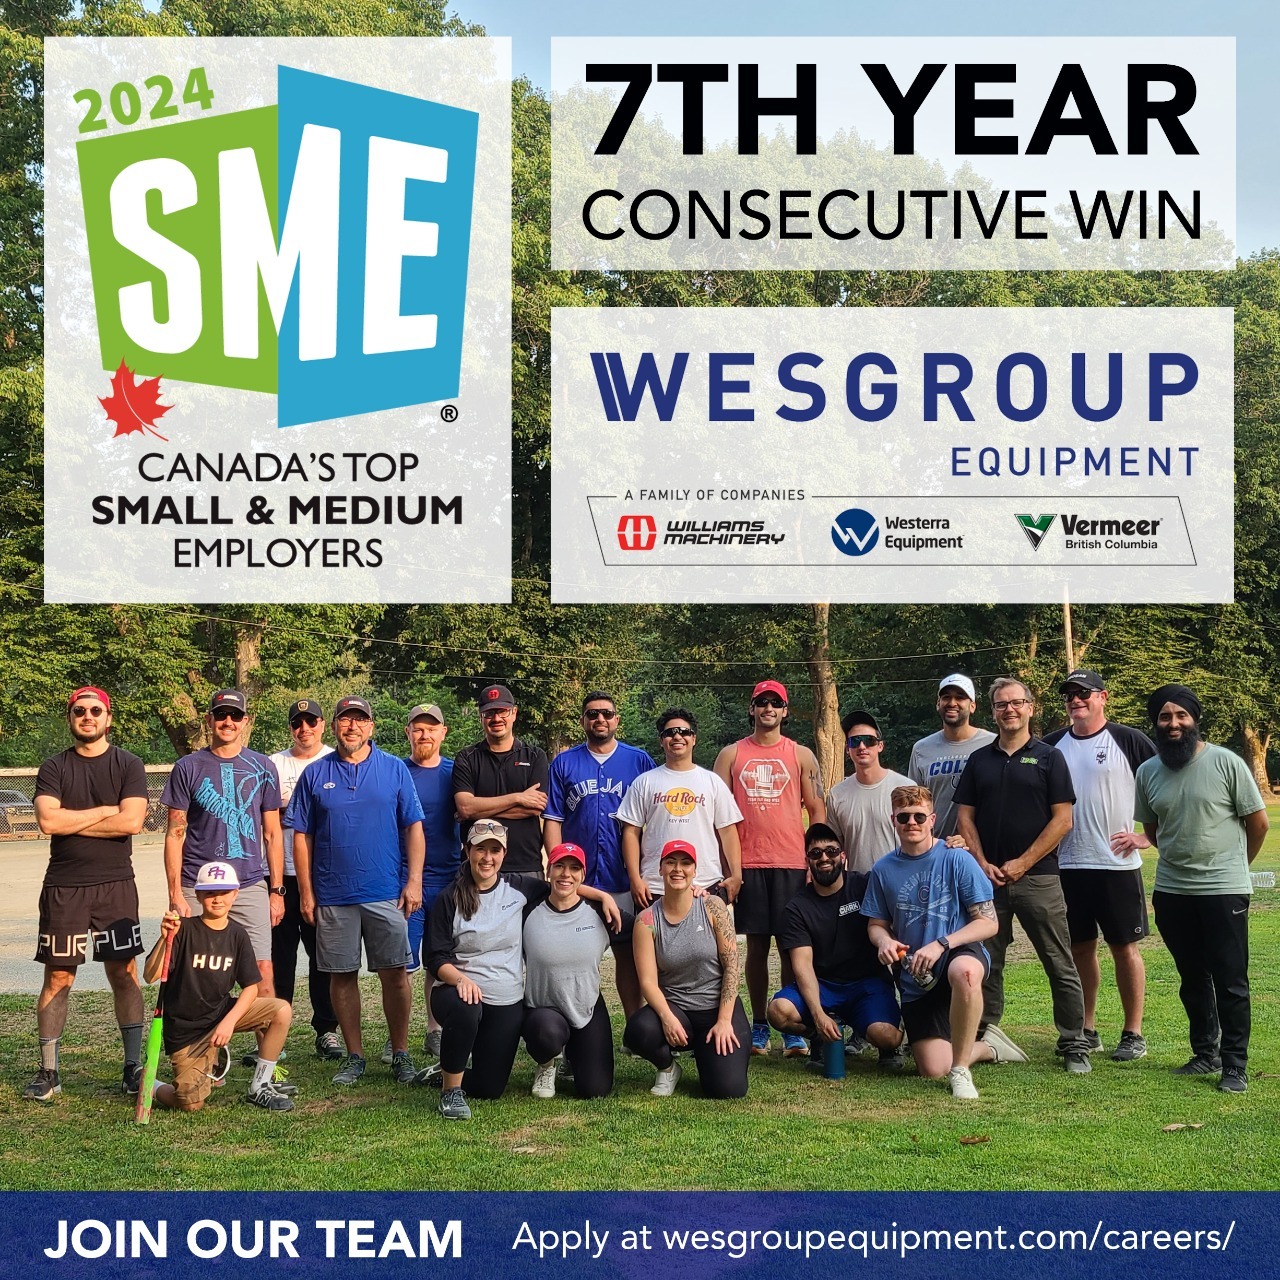 Exciting news! 🏆🎉

We're proud to announce that Wesgroup Equipment has been recognized as one of Canada's Top SMEs for the 7th year in a row.

This award recognizes employers that offer some of the most forward-thinking workplace initiatives, and we are honored to be on that list.

Read all about it on our blog. 🗞️
https://www.wesgroupequipment.com/our-family/news/canadas-top-sme-2024/